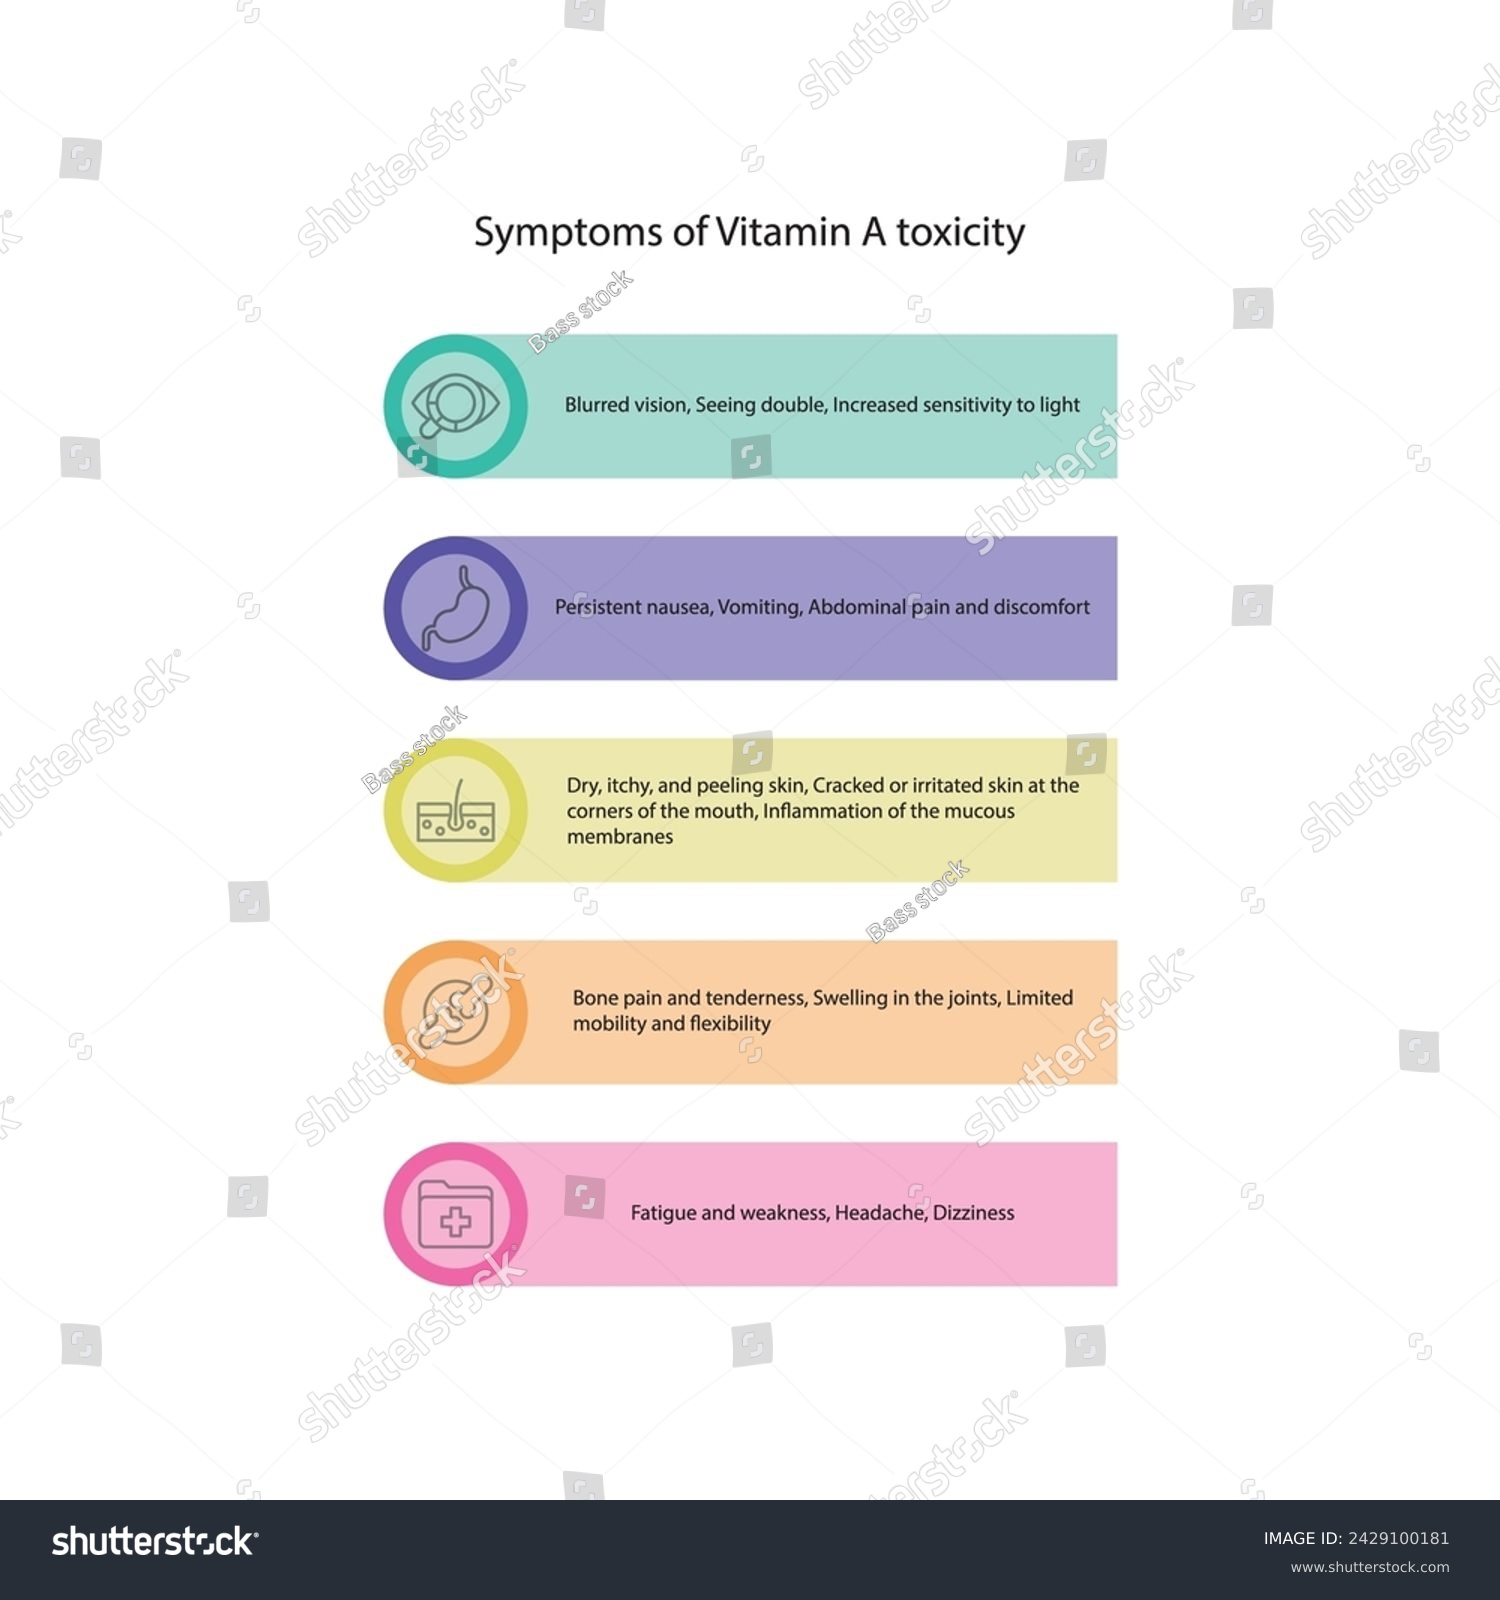 SVG of Diagram showing Vitamin A toxicity - Hypervitaminosis A - Signs and symptons - ocular, gastrointestinal, skin, bones and joint symptoms. Simplified schematic diagram. svg